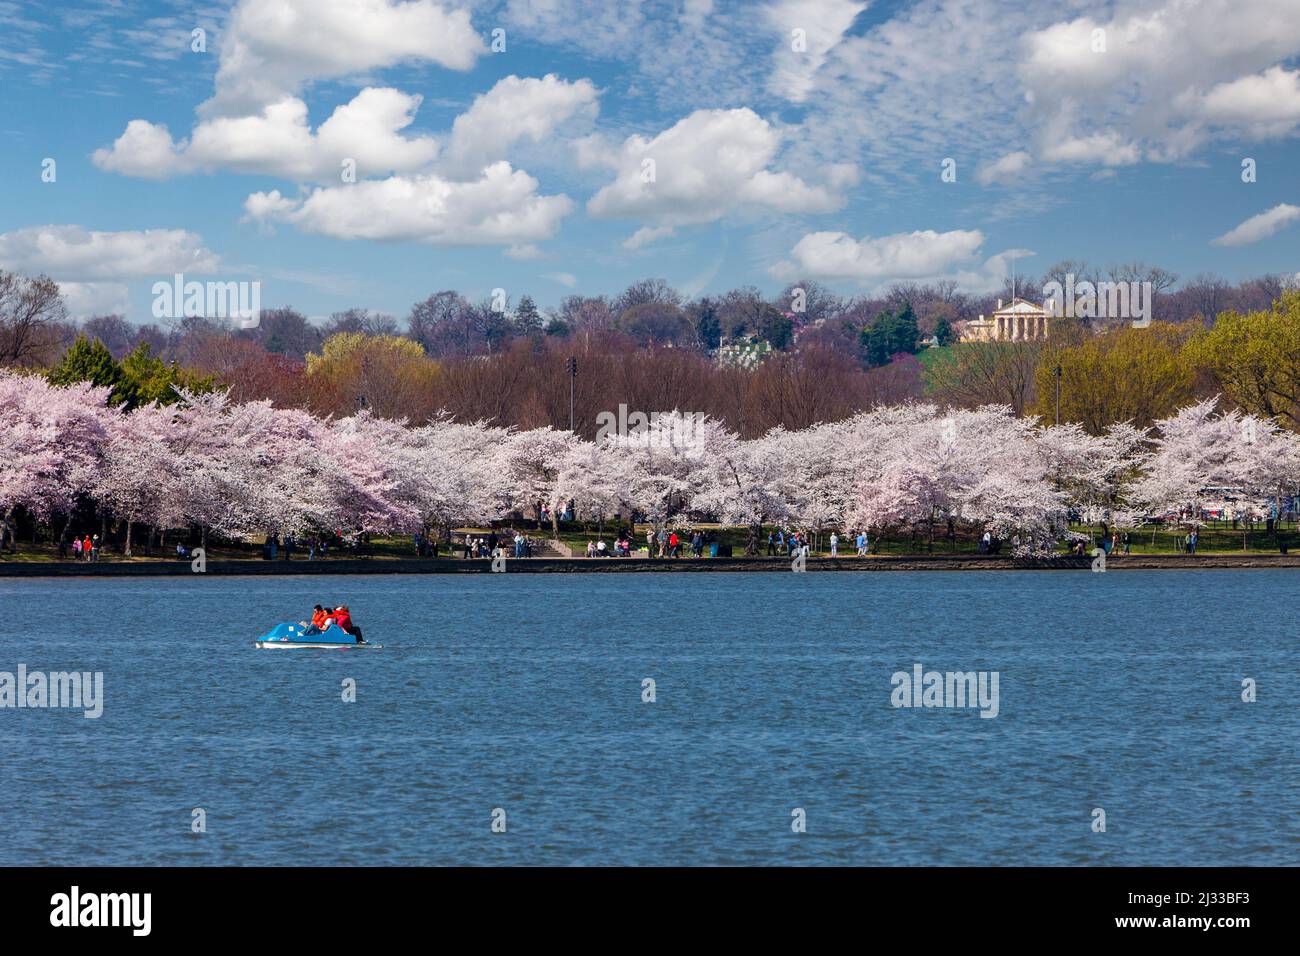 Washington, D.C., Cherry Blossoms.  Paddle-Boating on the Tidal Basin.  Custis-Lee Mansion on Hilltop in Background. Stock Photo